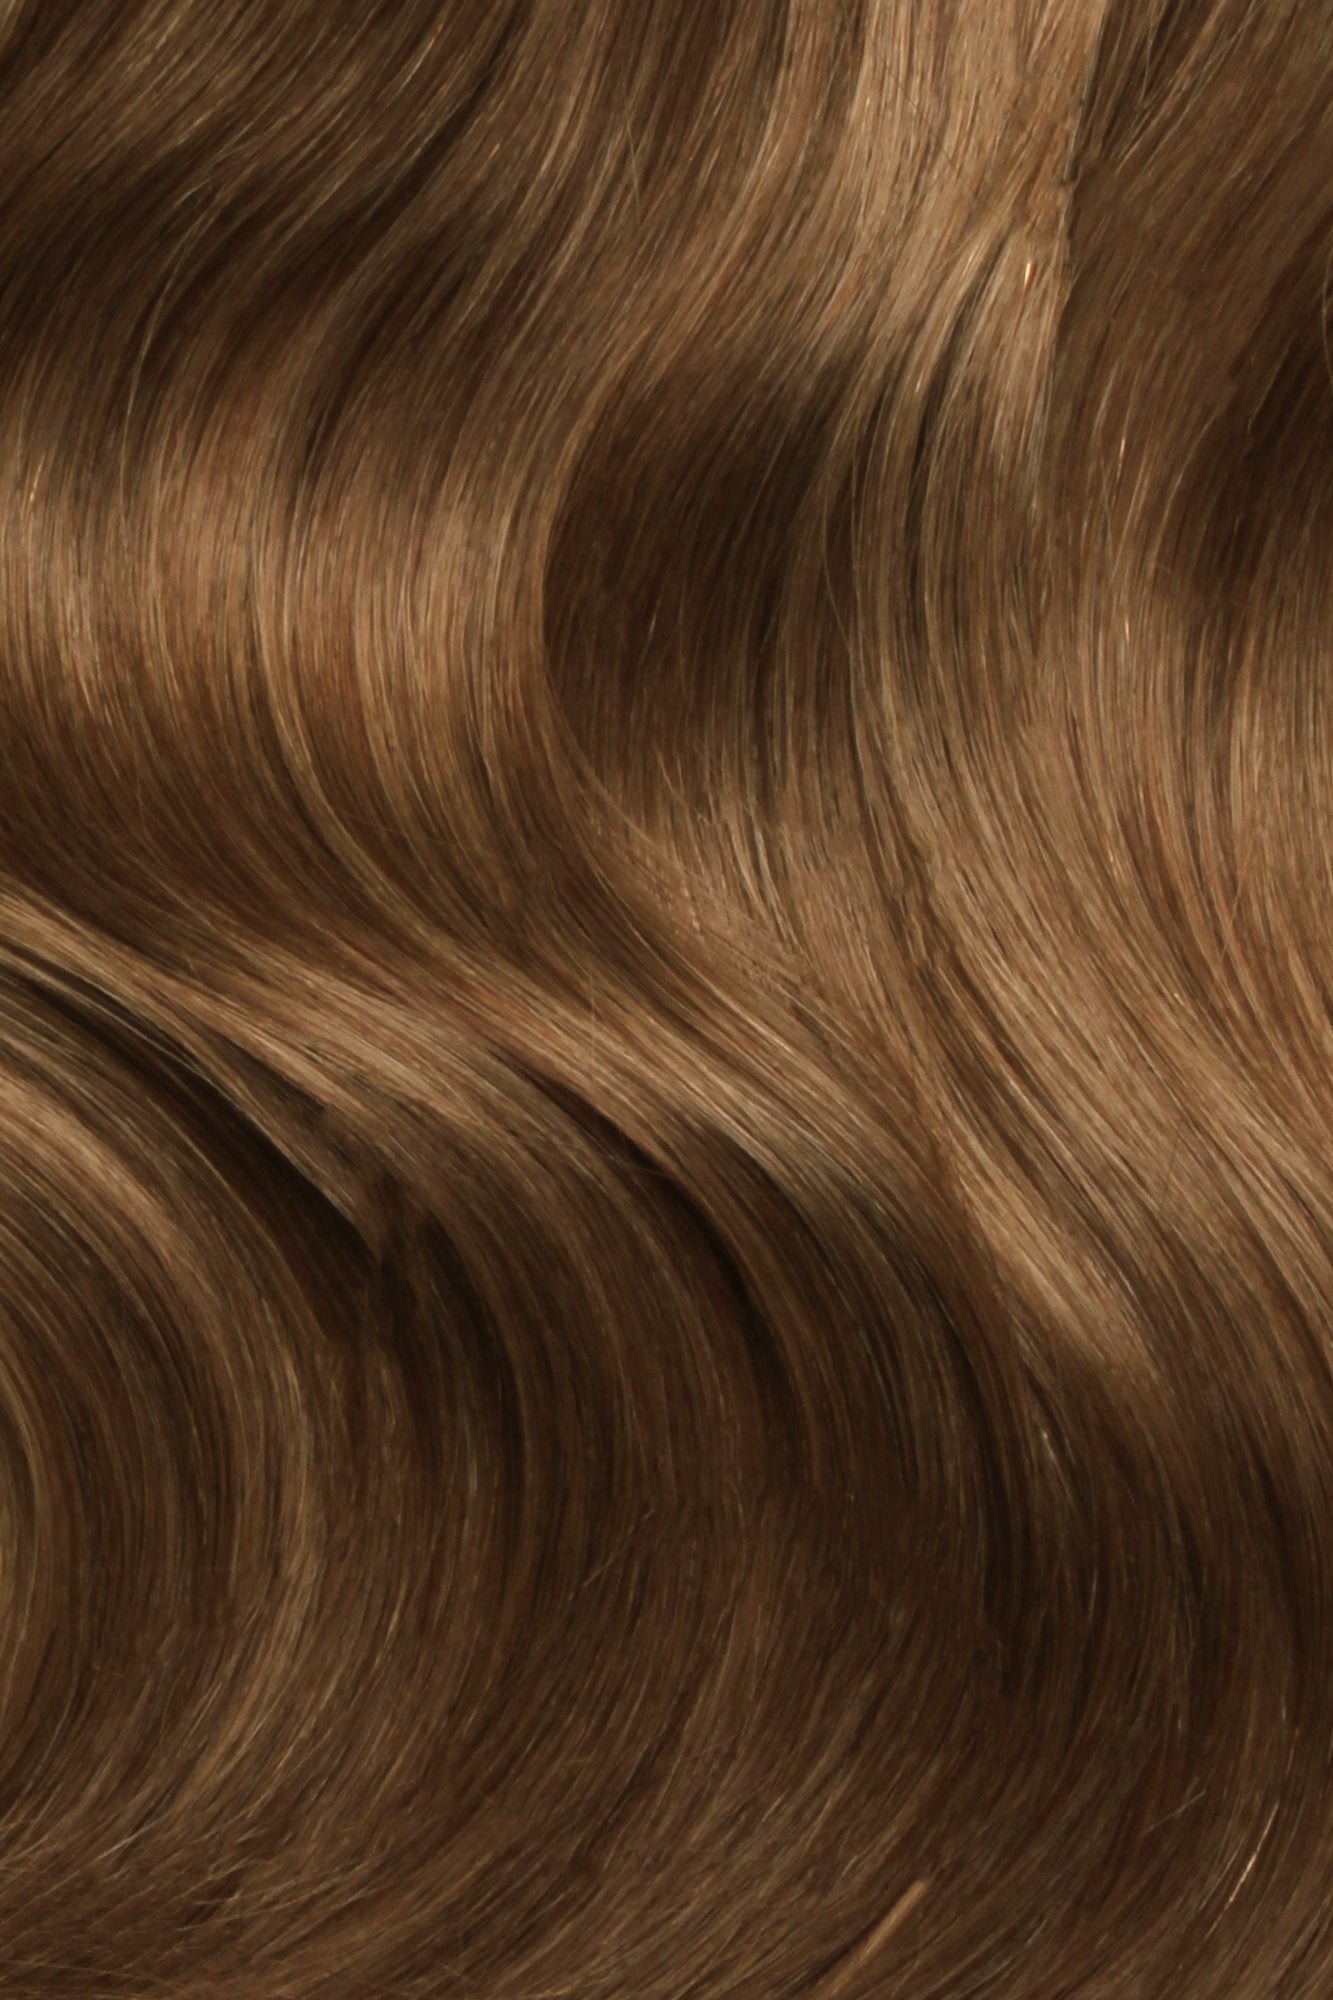 SEAMLESS® Flat Weft 16 Inches - SWAY Hair Extensions Chestnut-Brown-Mix-4-6 Natural SEAMLESS® Flat Weft 16 Inches extensions. Thin, flexible, and discreet. 100% Double Drawn Remy Human Hair. Versatile and reusable